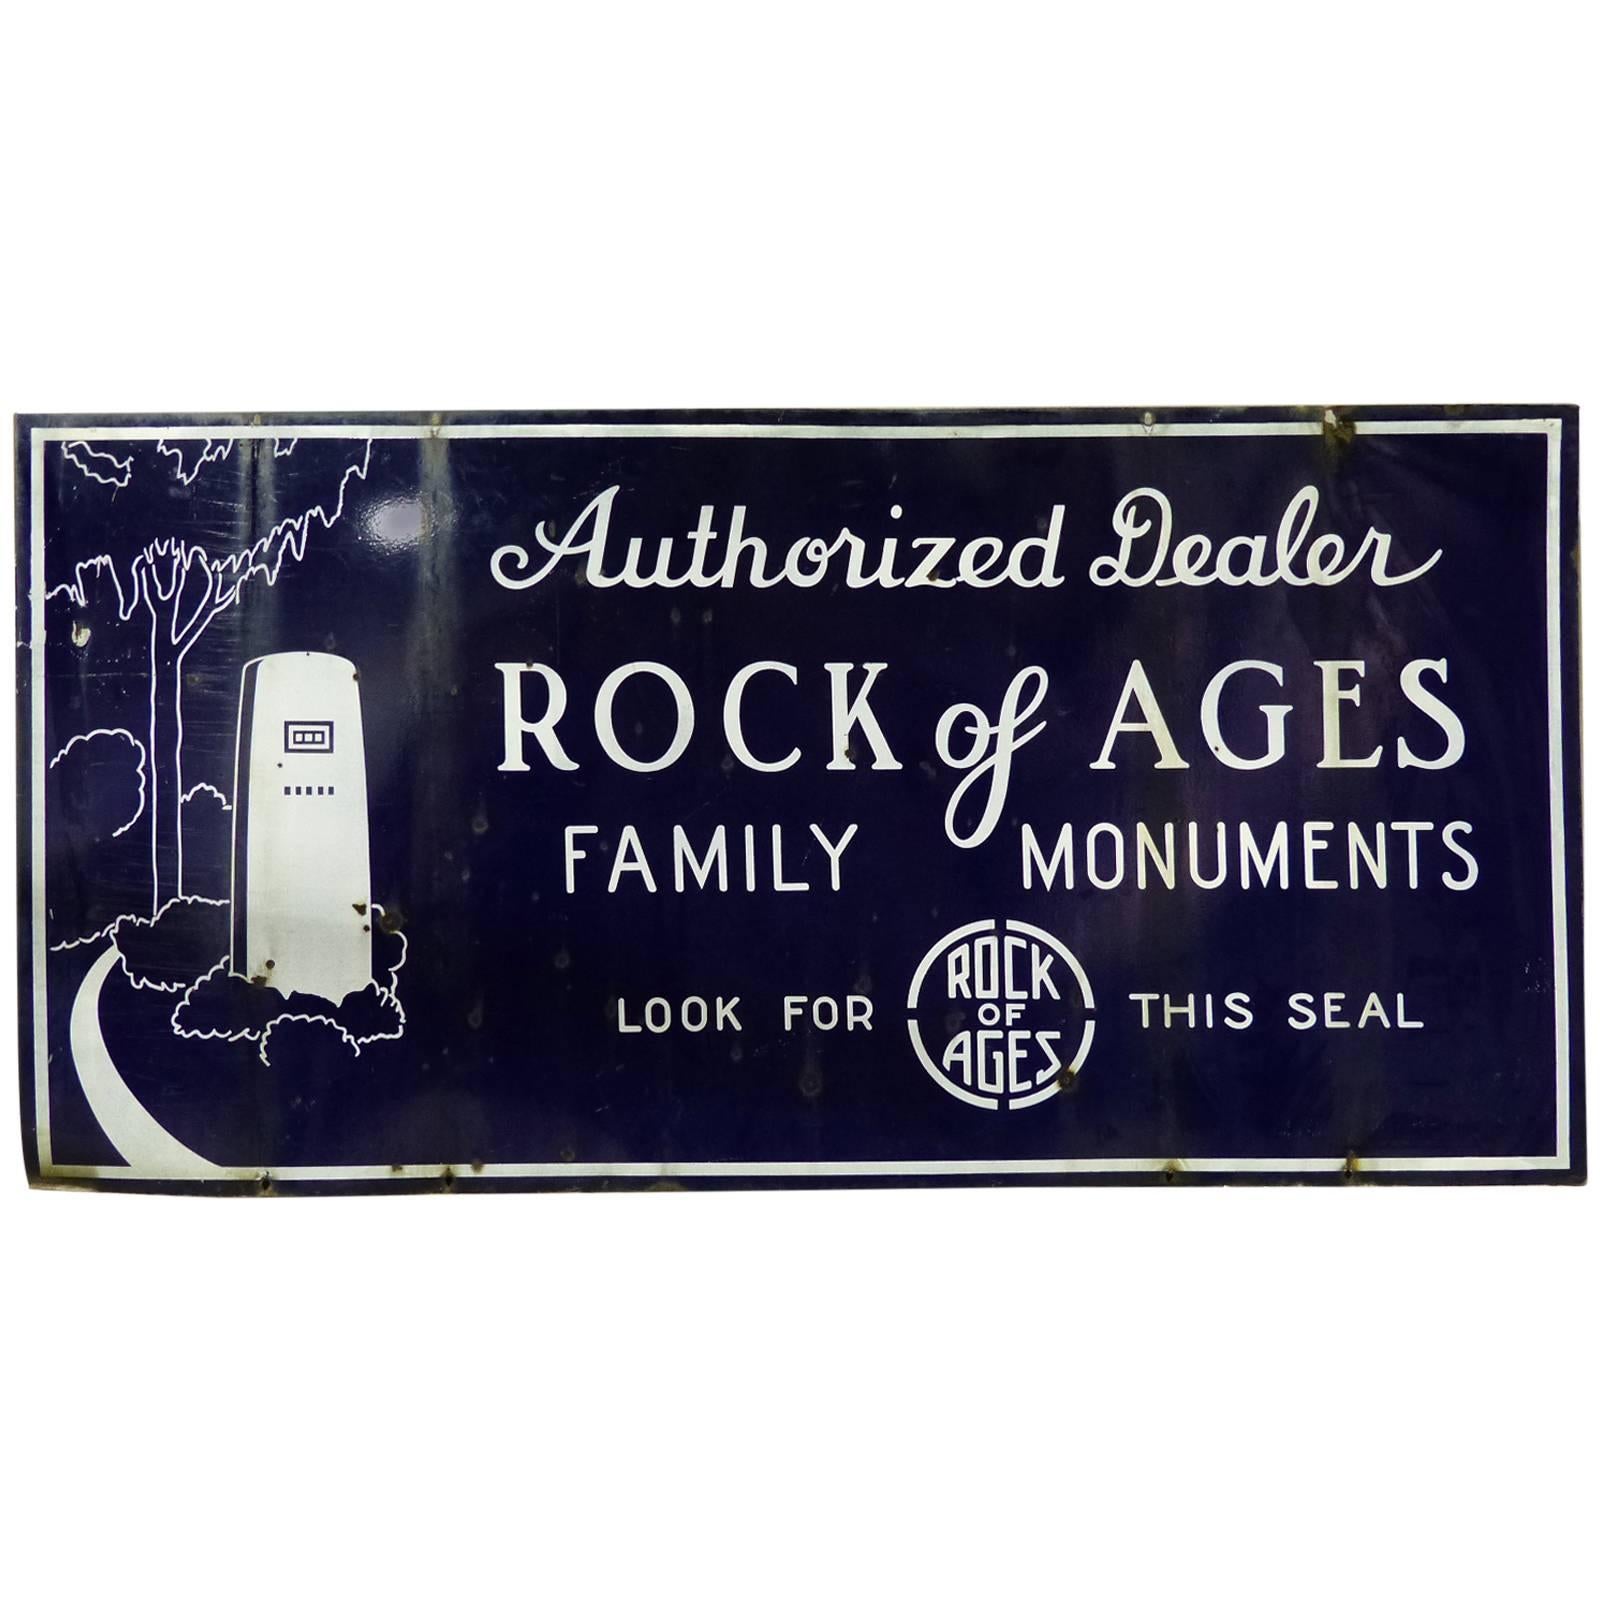 1940 Monumental Two-Sided Porcelain Advertising Sign